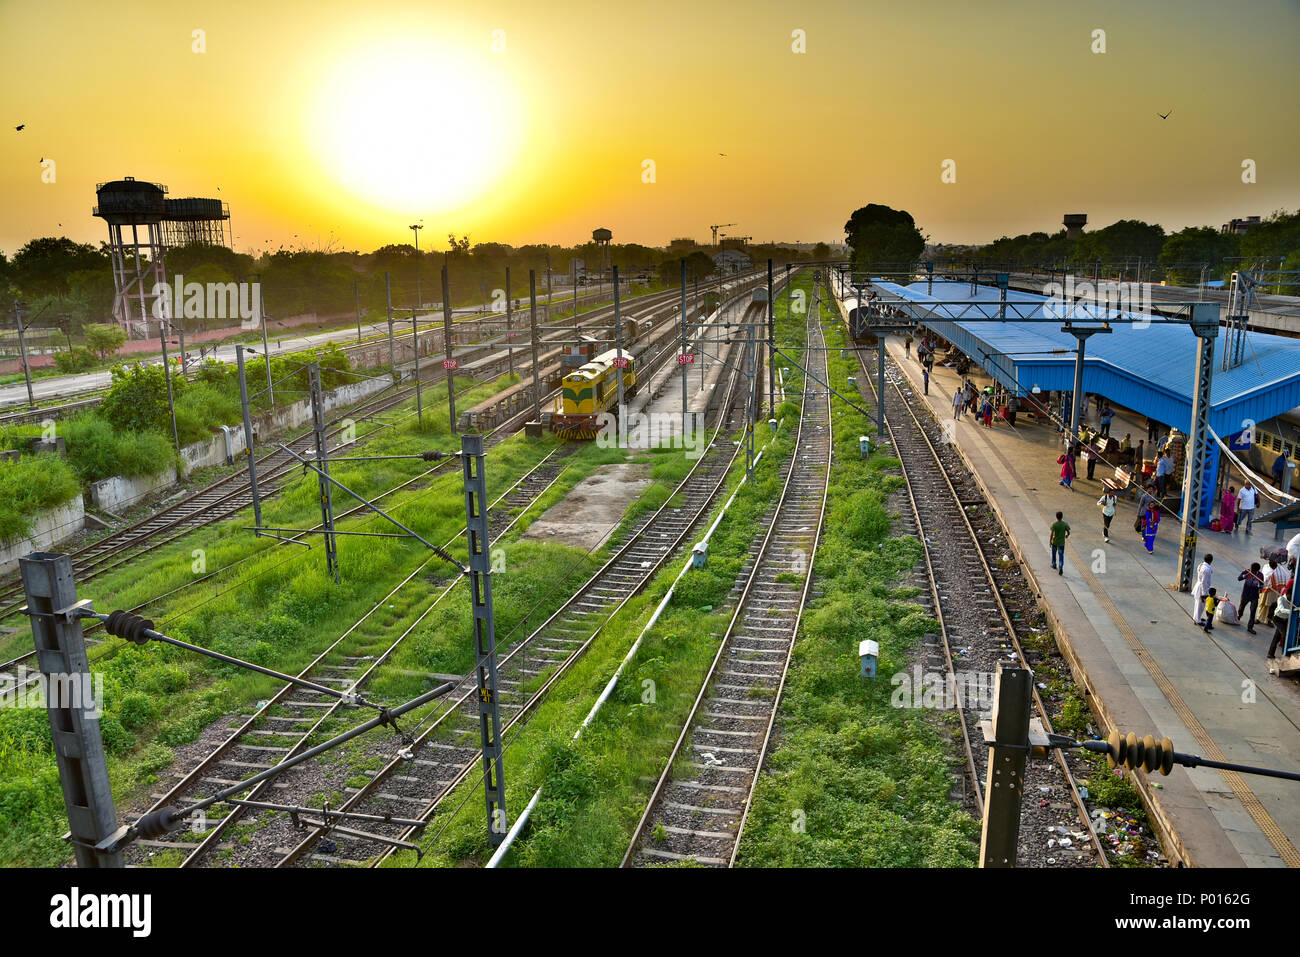 Sunrise at a railway station in India Stock Photo